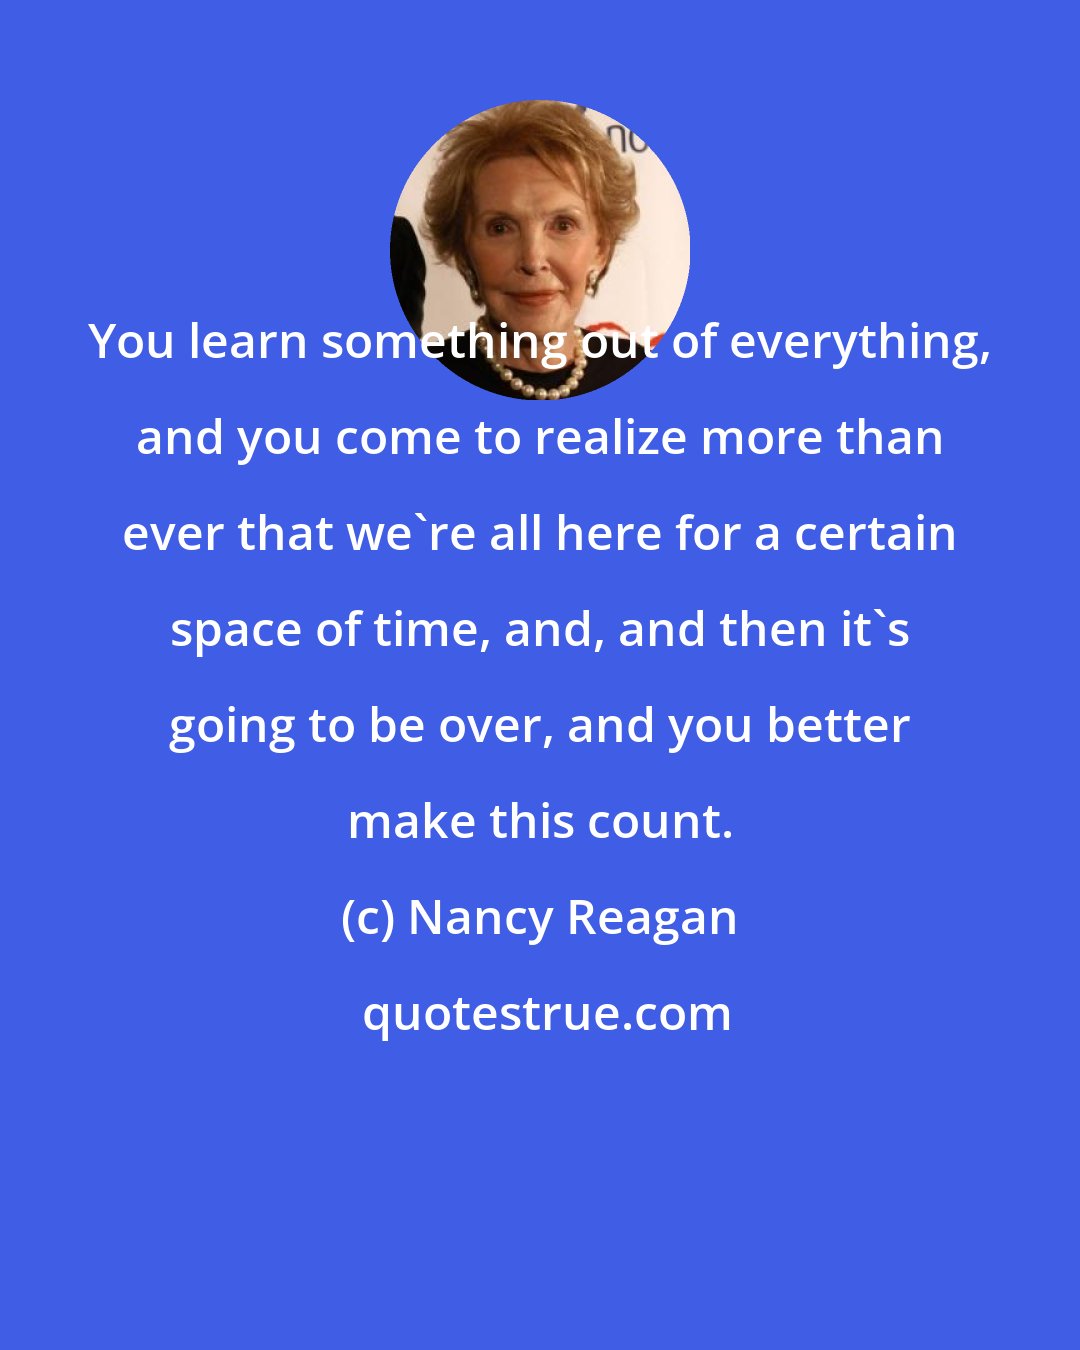 Nancy Reagan: You learn something out of everything, and you come to realize more than ever that we're all here for a certain space of time, and, and then it's going to be over, and you better make this count.